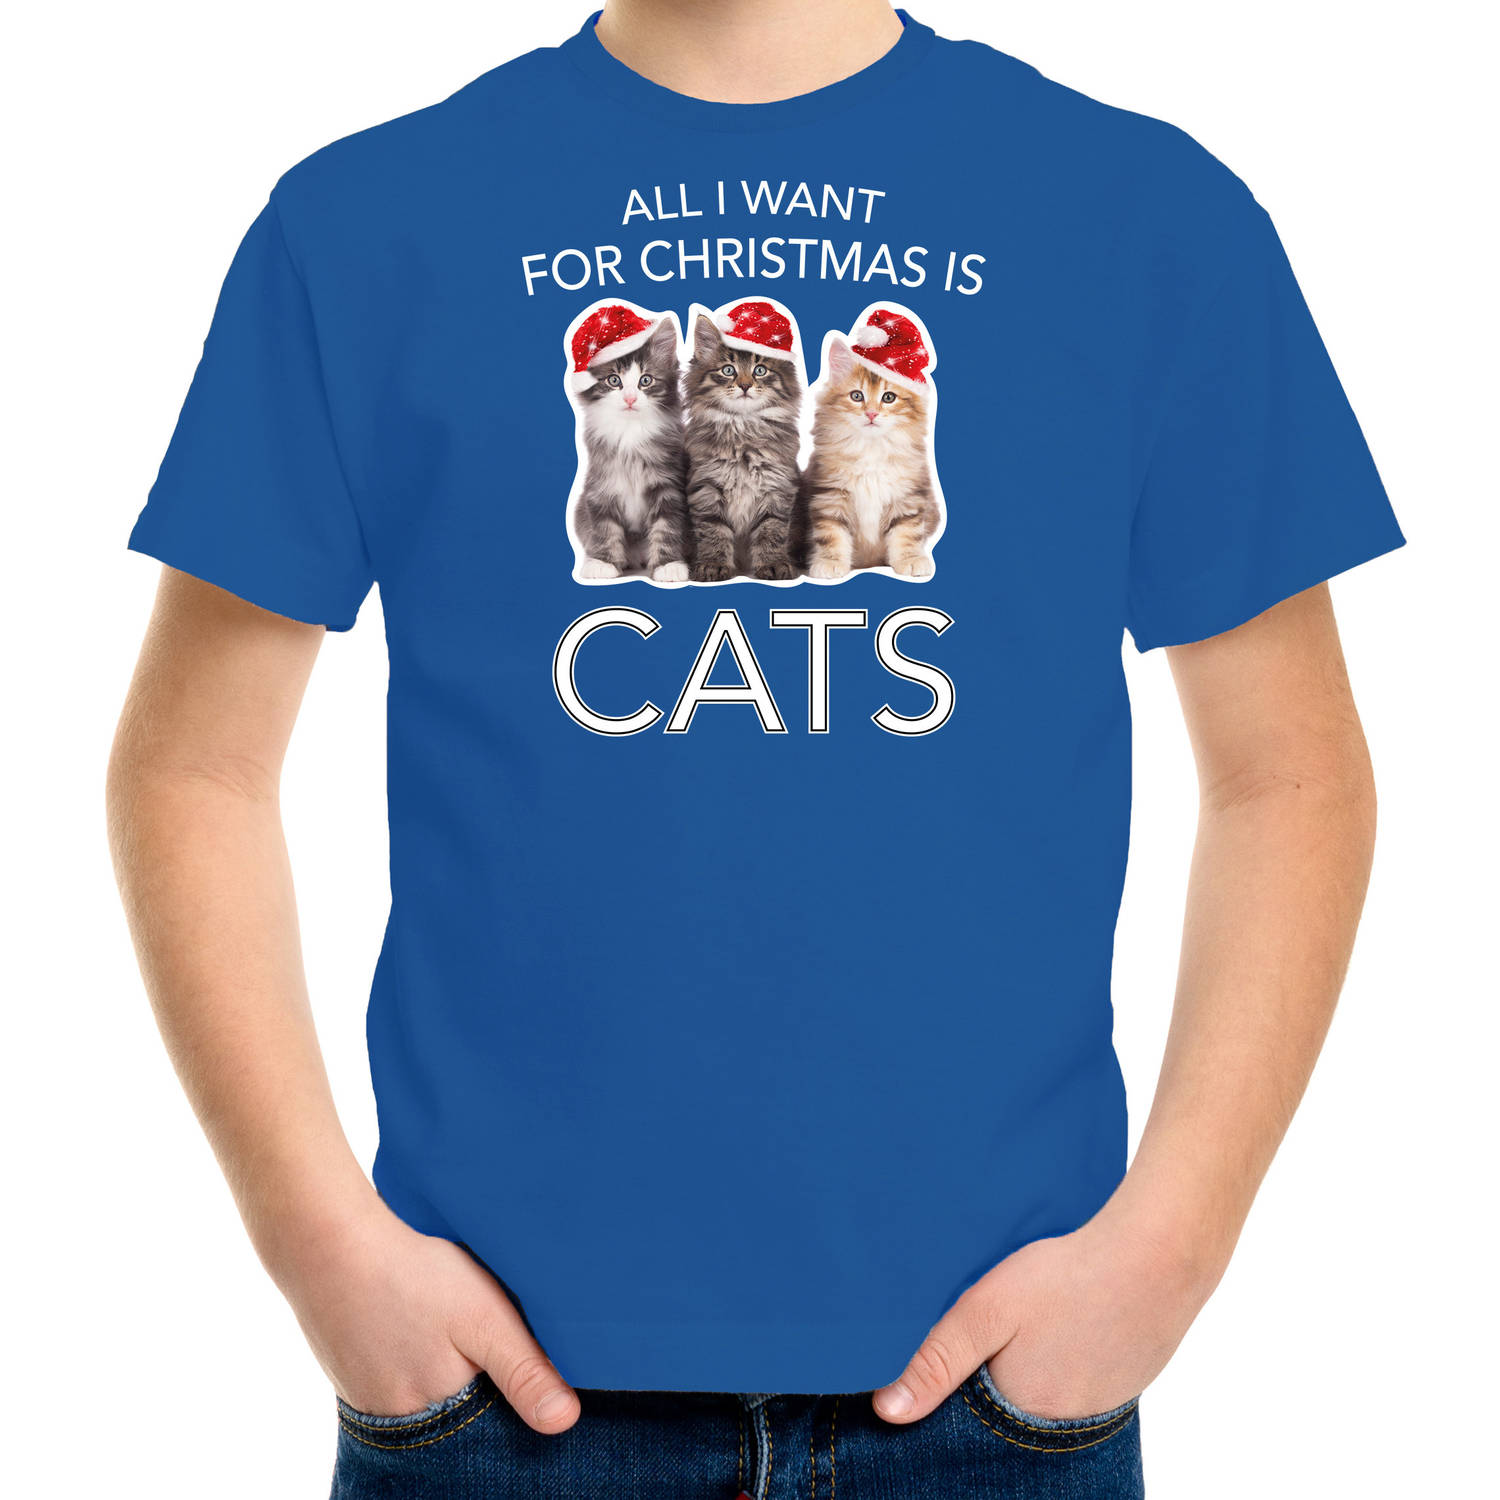 Blauw Kerst shirt/ Kerstkleding All i want for Christmas is cats voor kinderen L (140-152) - kerst t-shirts kind